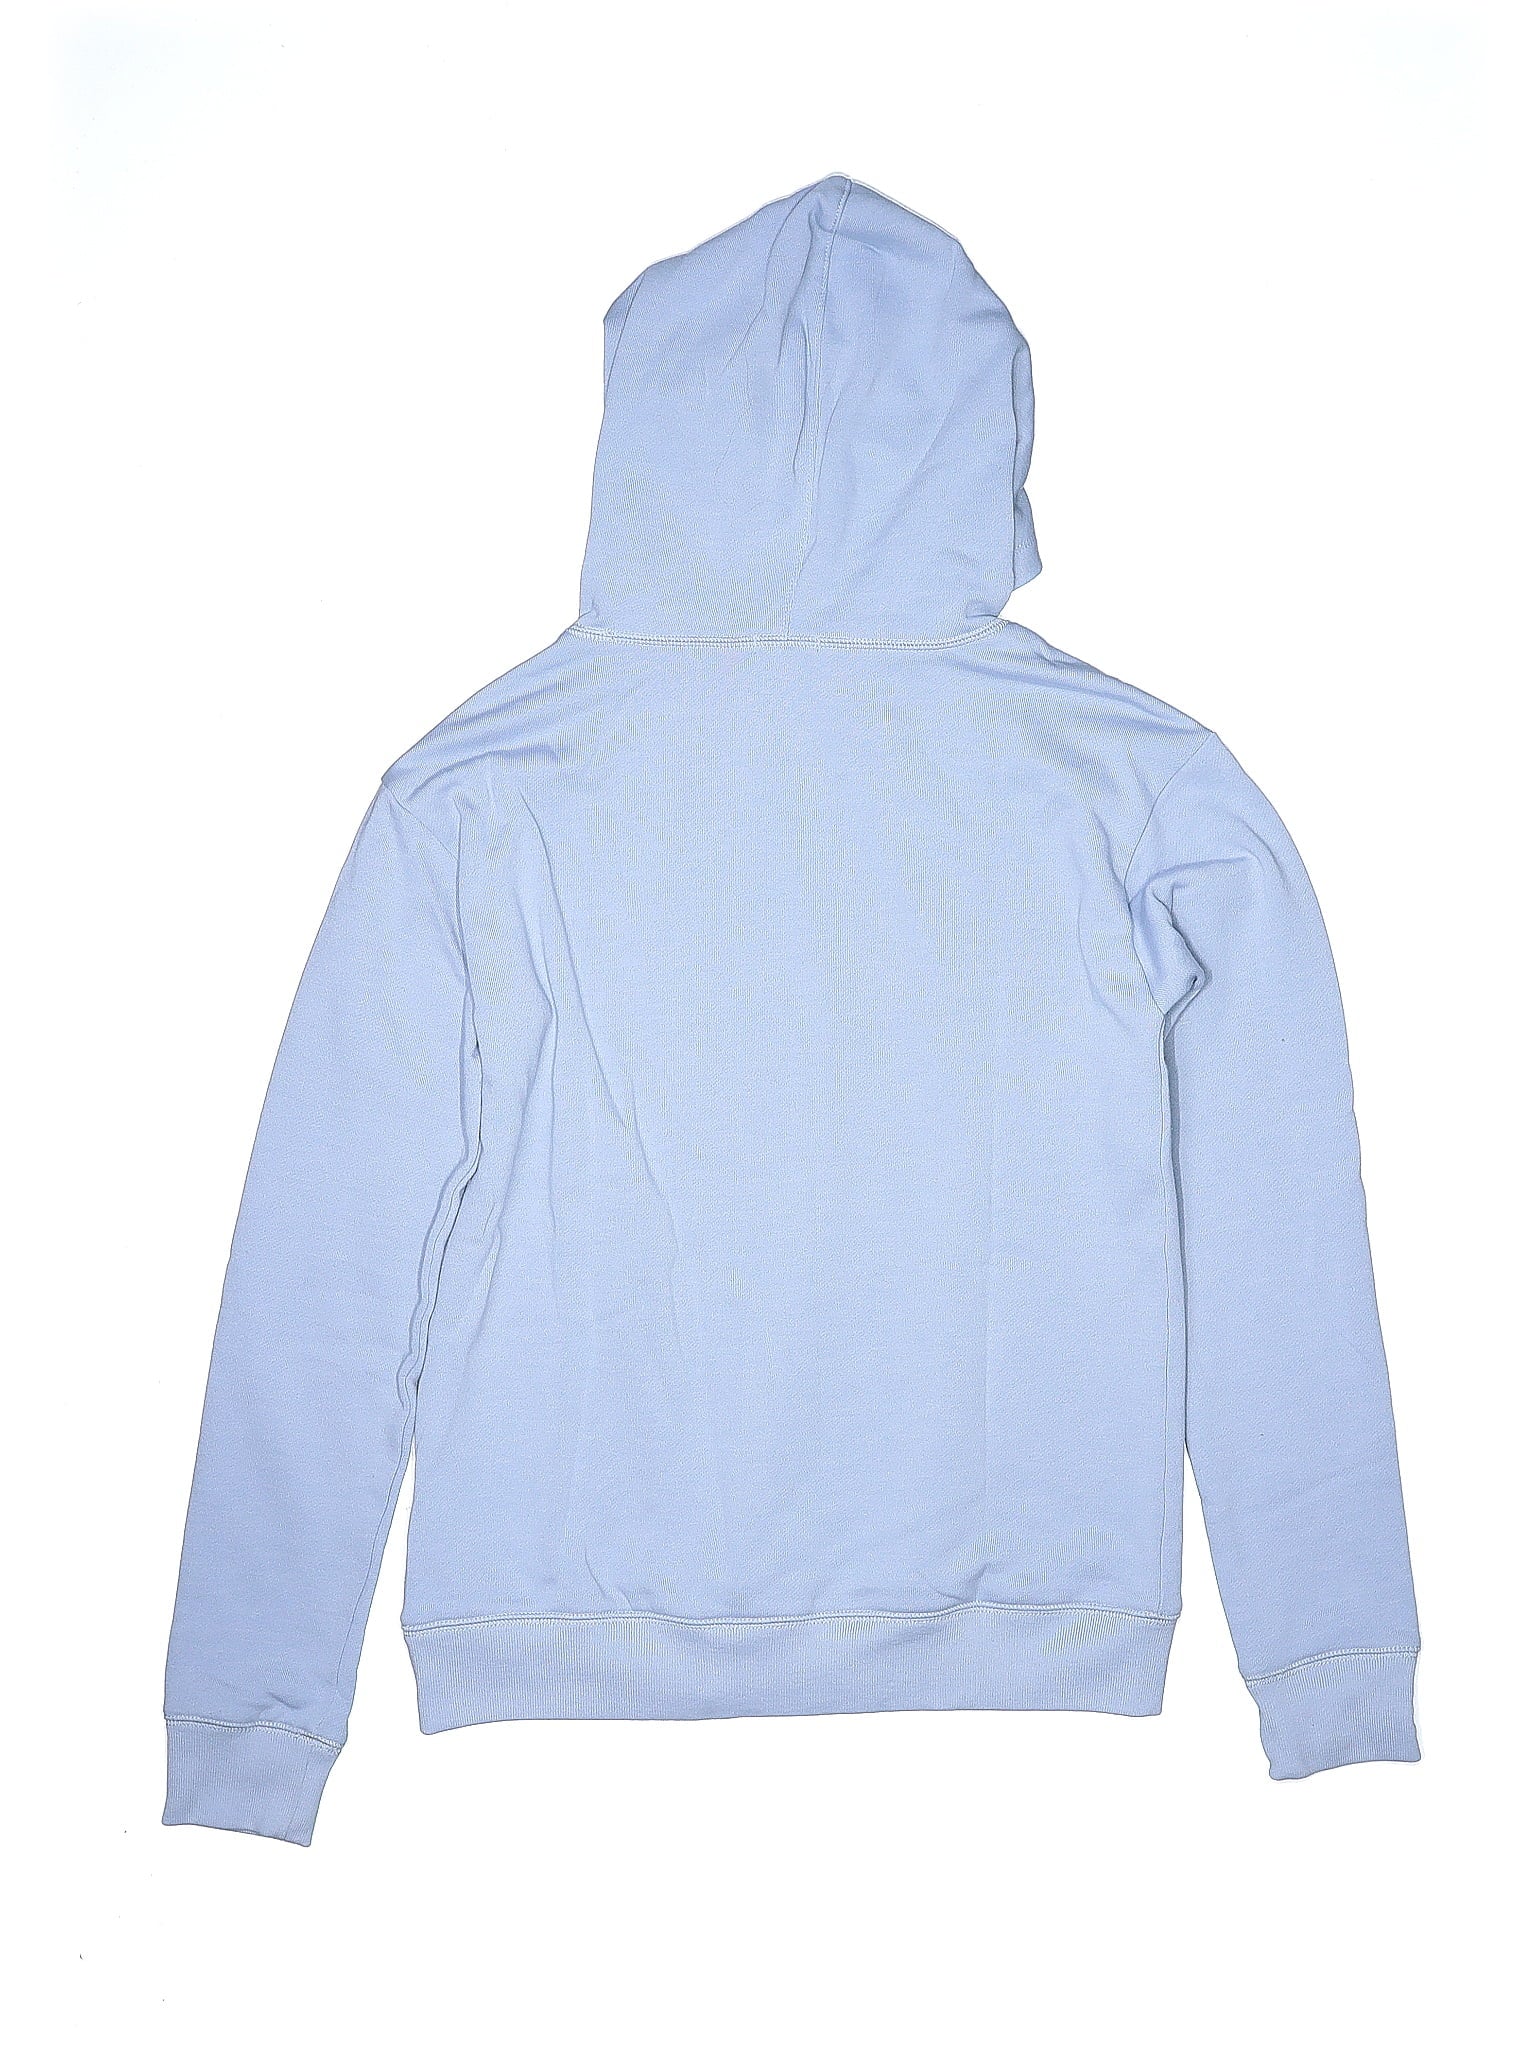 Pullover Hoodie size - X-Large (Youth)